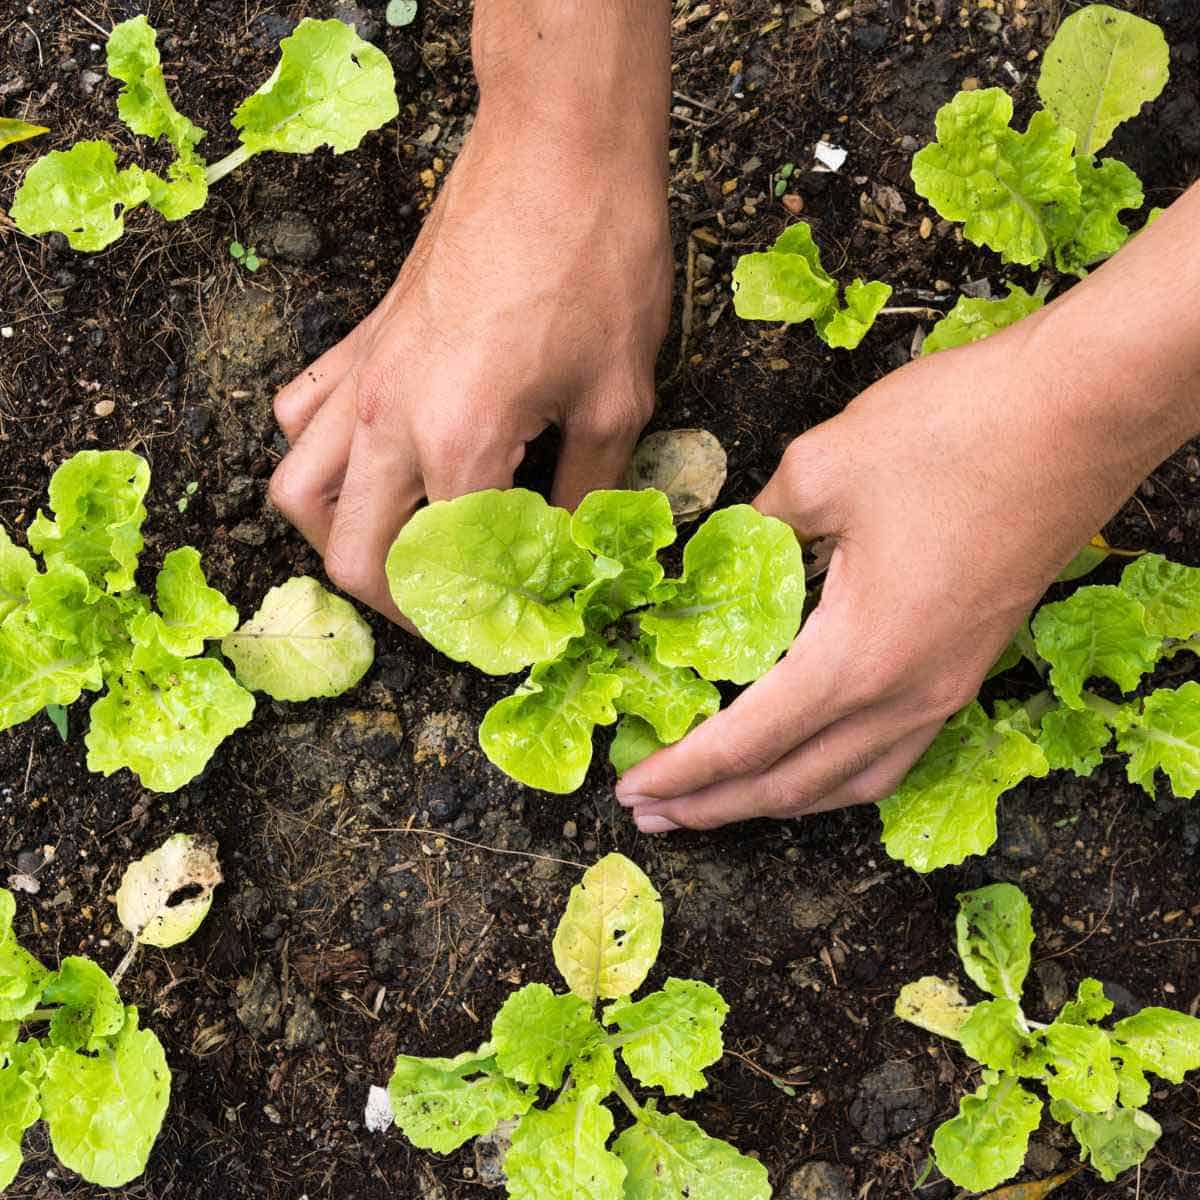 A person getting ready to pick lettuce in the garden.